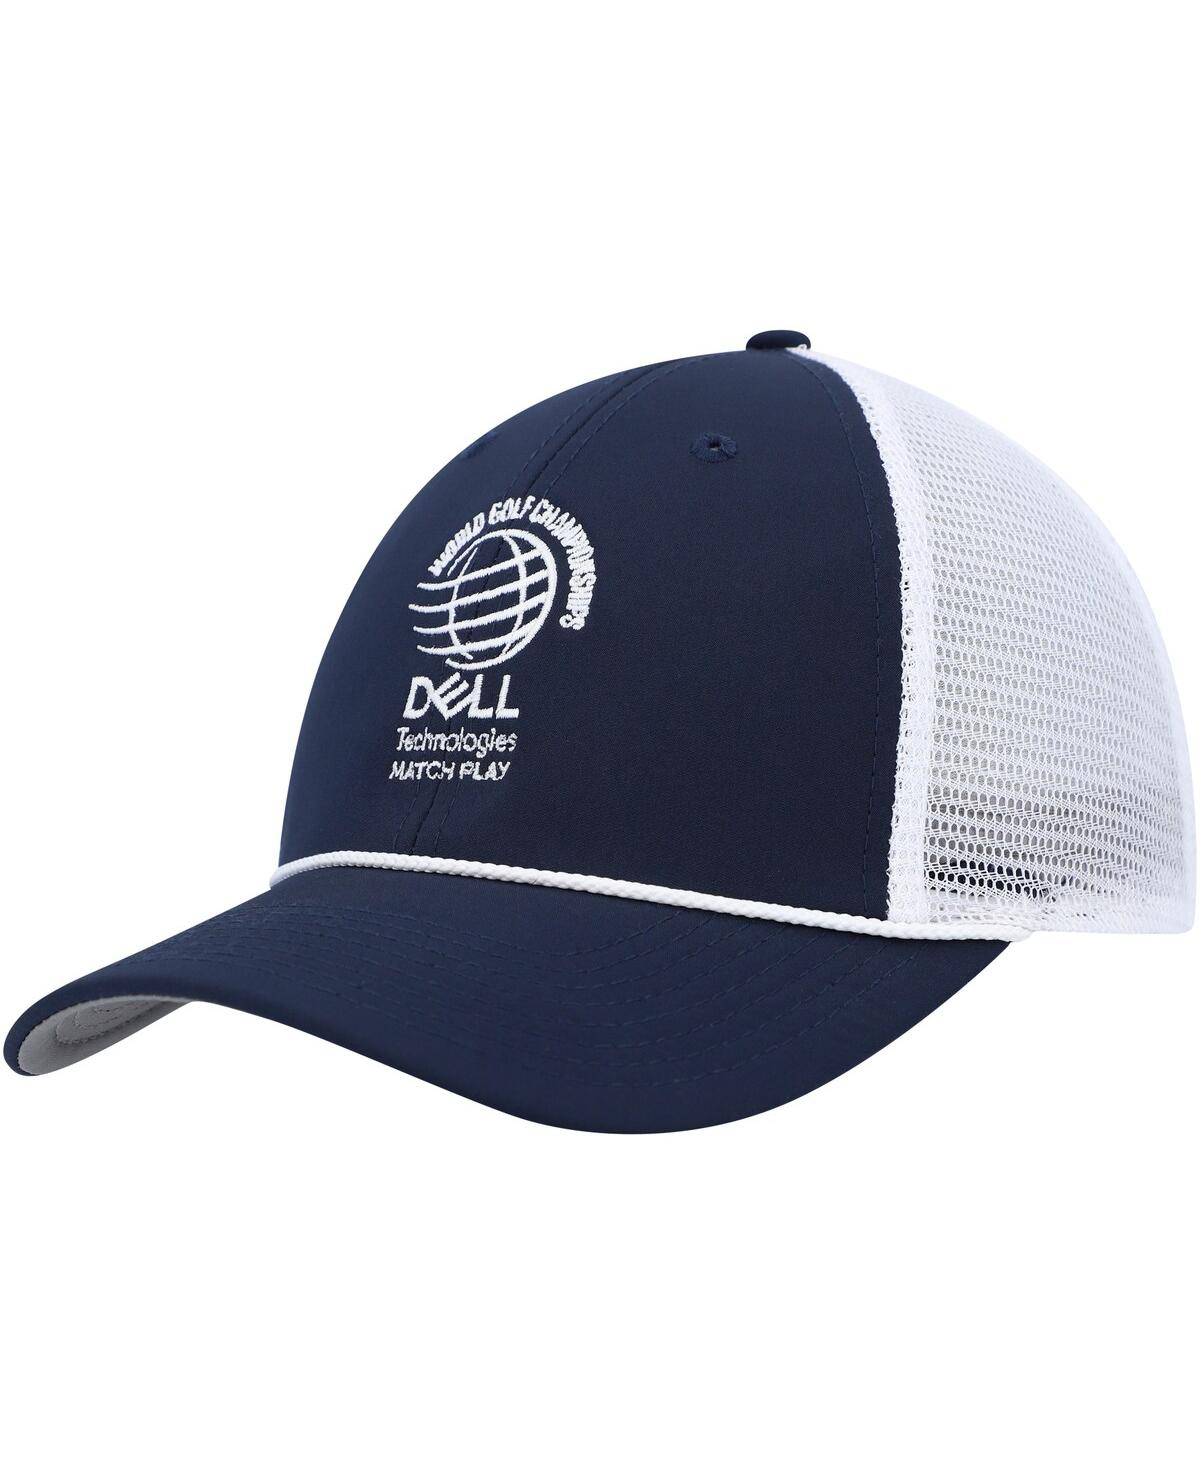 Men's Imperial Navy Wgc-Dell Technologies Match Play The Night Owl Snapback Hat - Navy